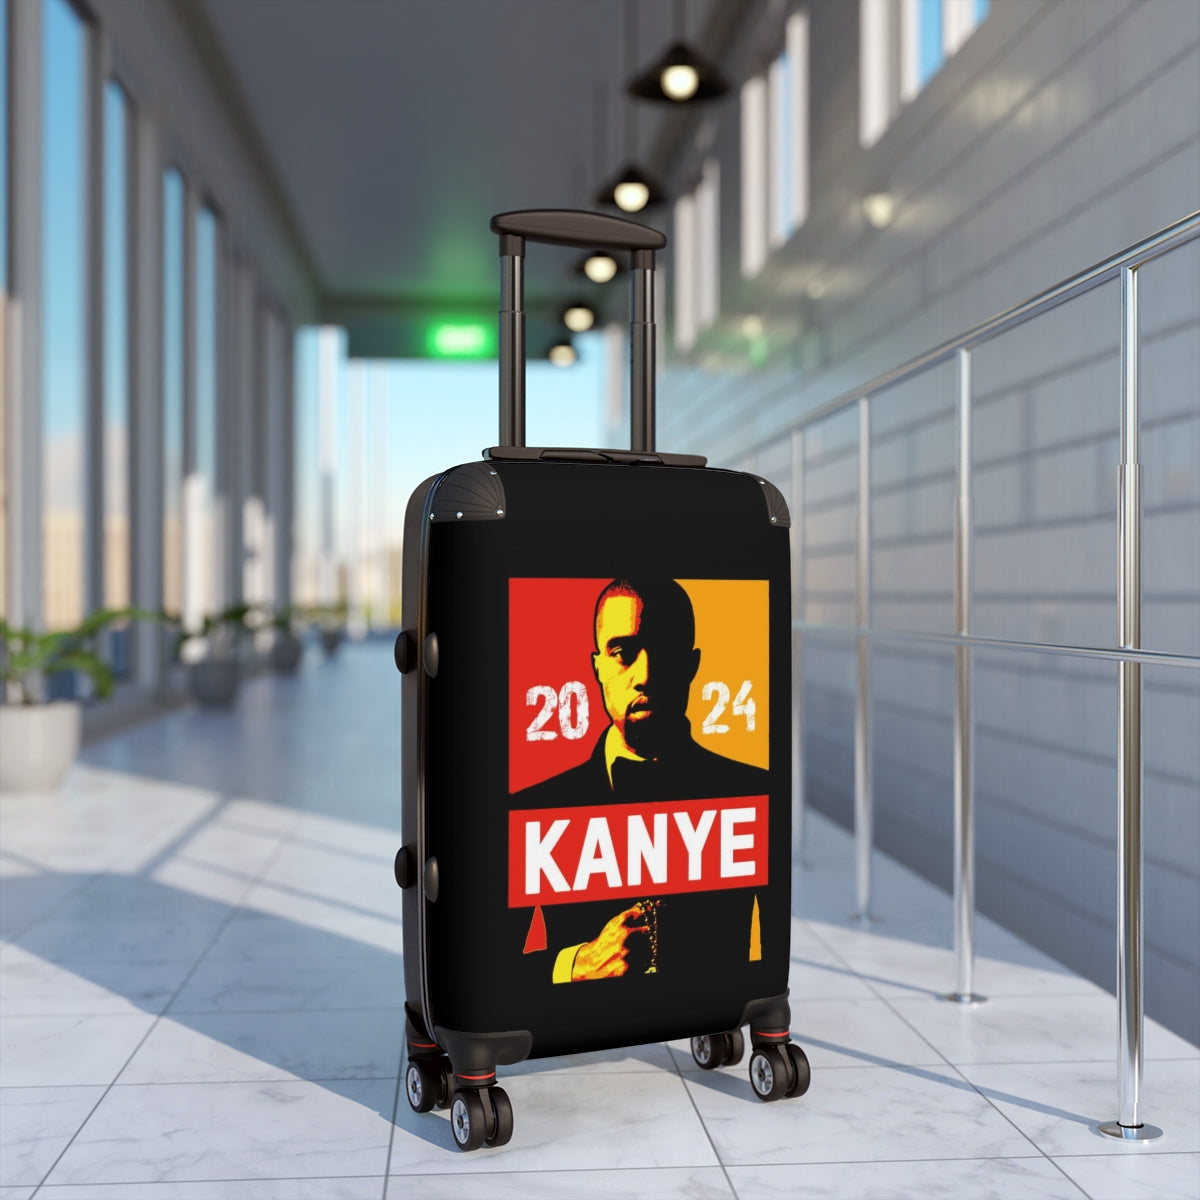 Getrott Kanye West for President 2024 Black Red Yellow Cabin Suitcase Inner Pockets Extended Storage Adjustable Telescopic Handle Inner Pockets Double wheeled Polycarbonate Hard-shell Built-in Lock